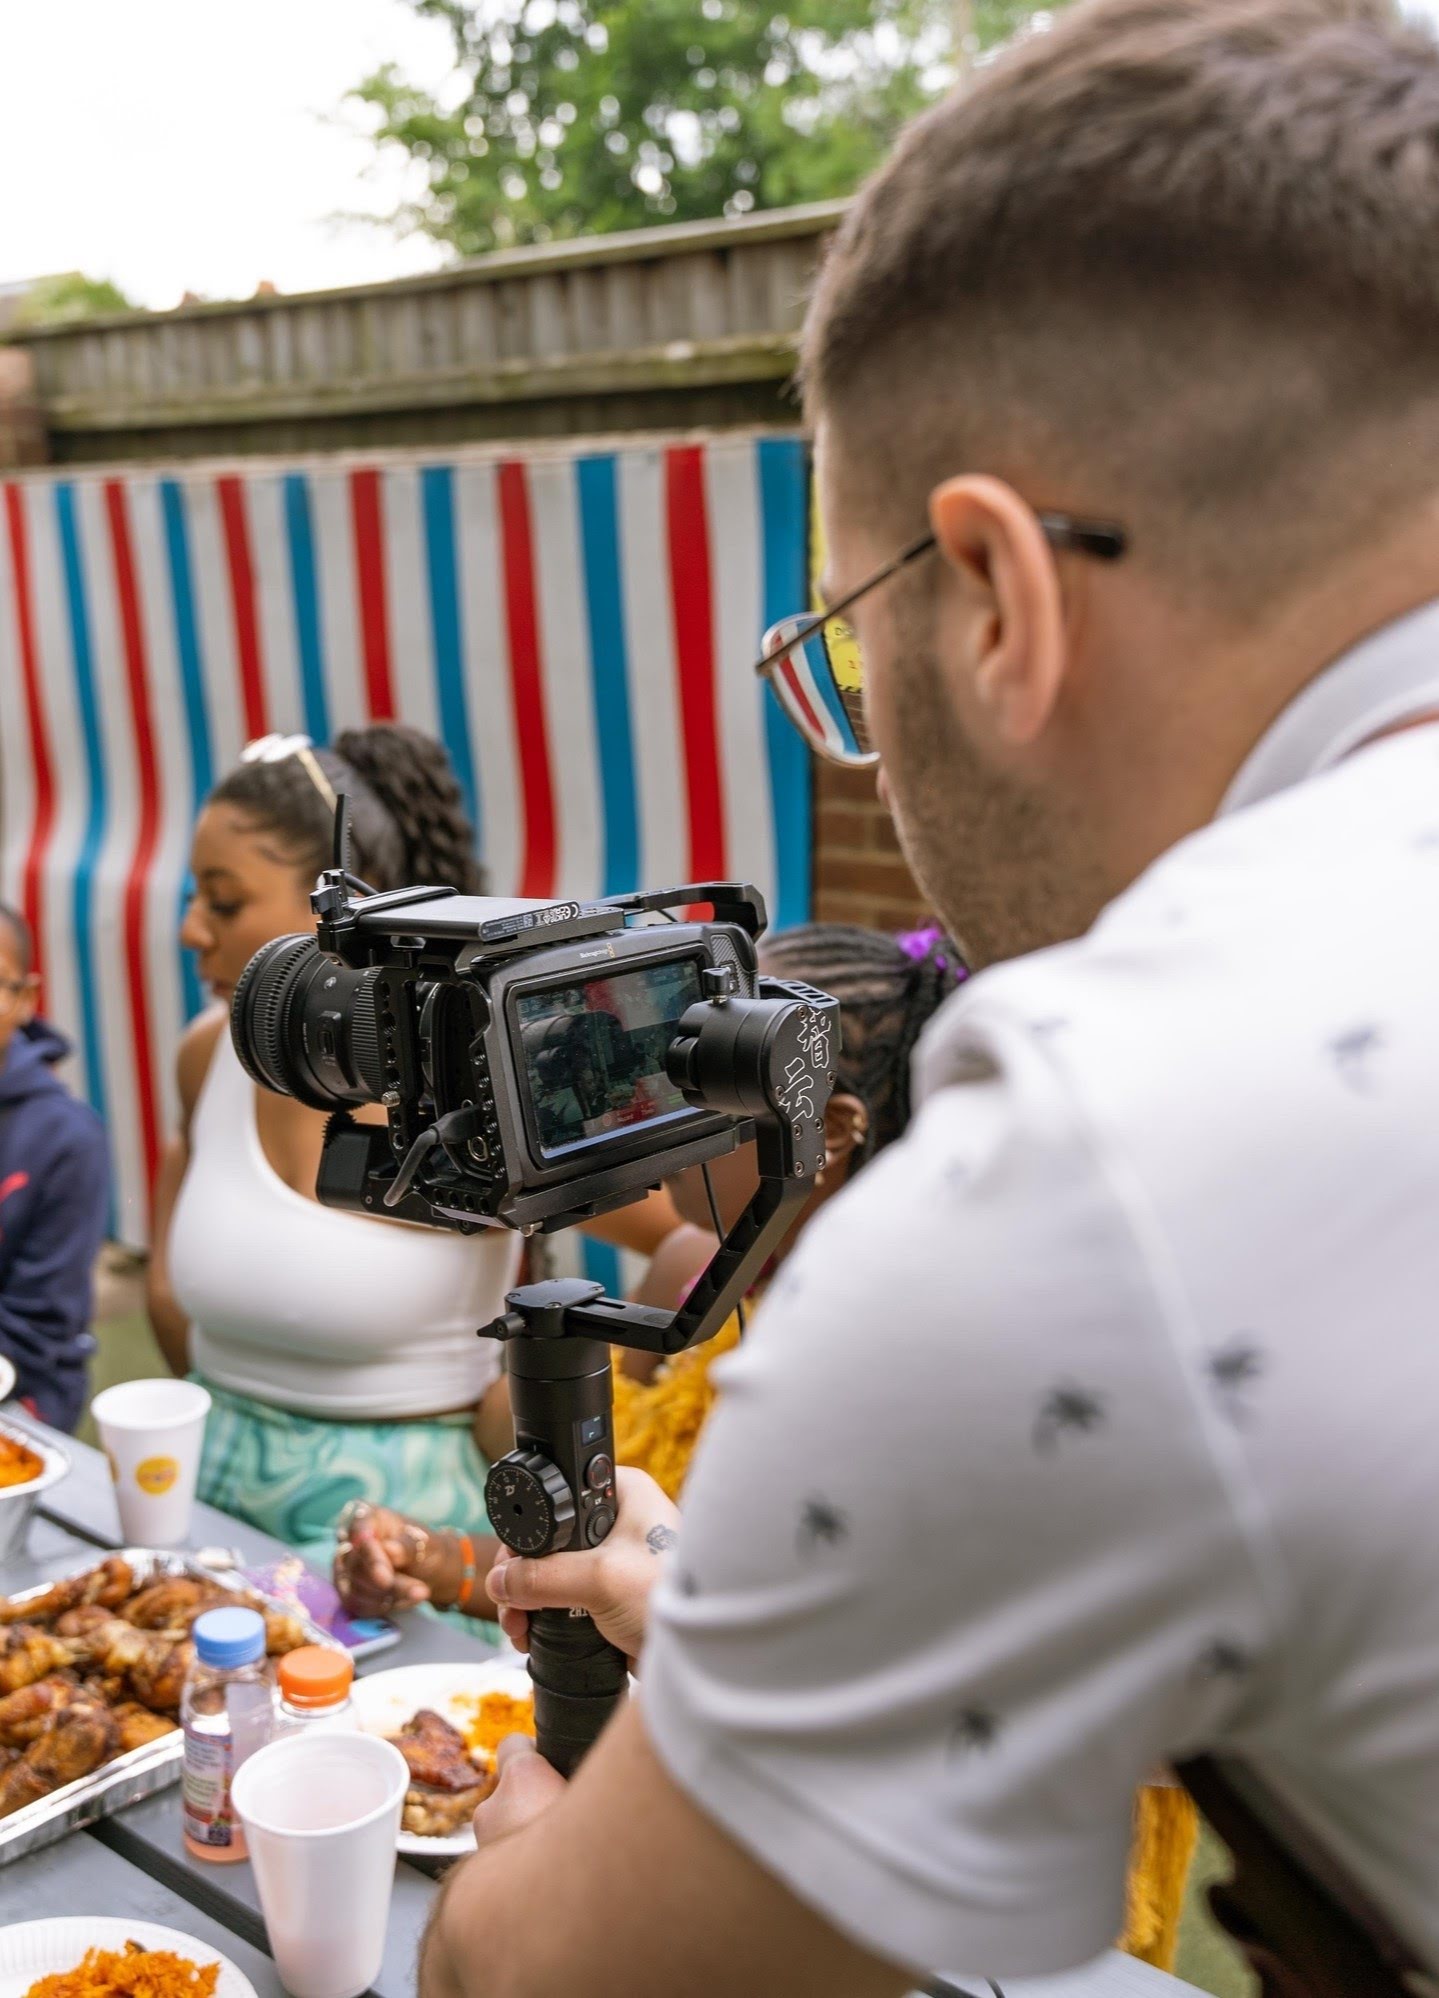 Videographer shooting with a Black Magick Pocket (BMPCC) 4K and a Zhiyun Carne 2 stabilzer for msuic video at the table with a lots of food and some girls in the background.